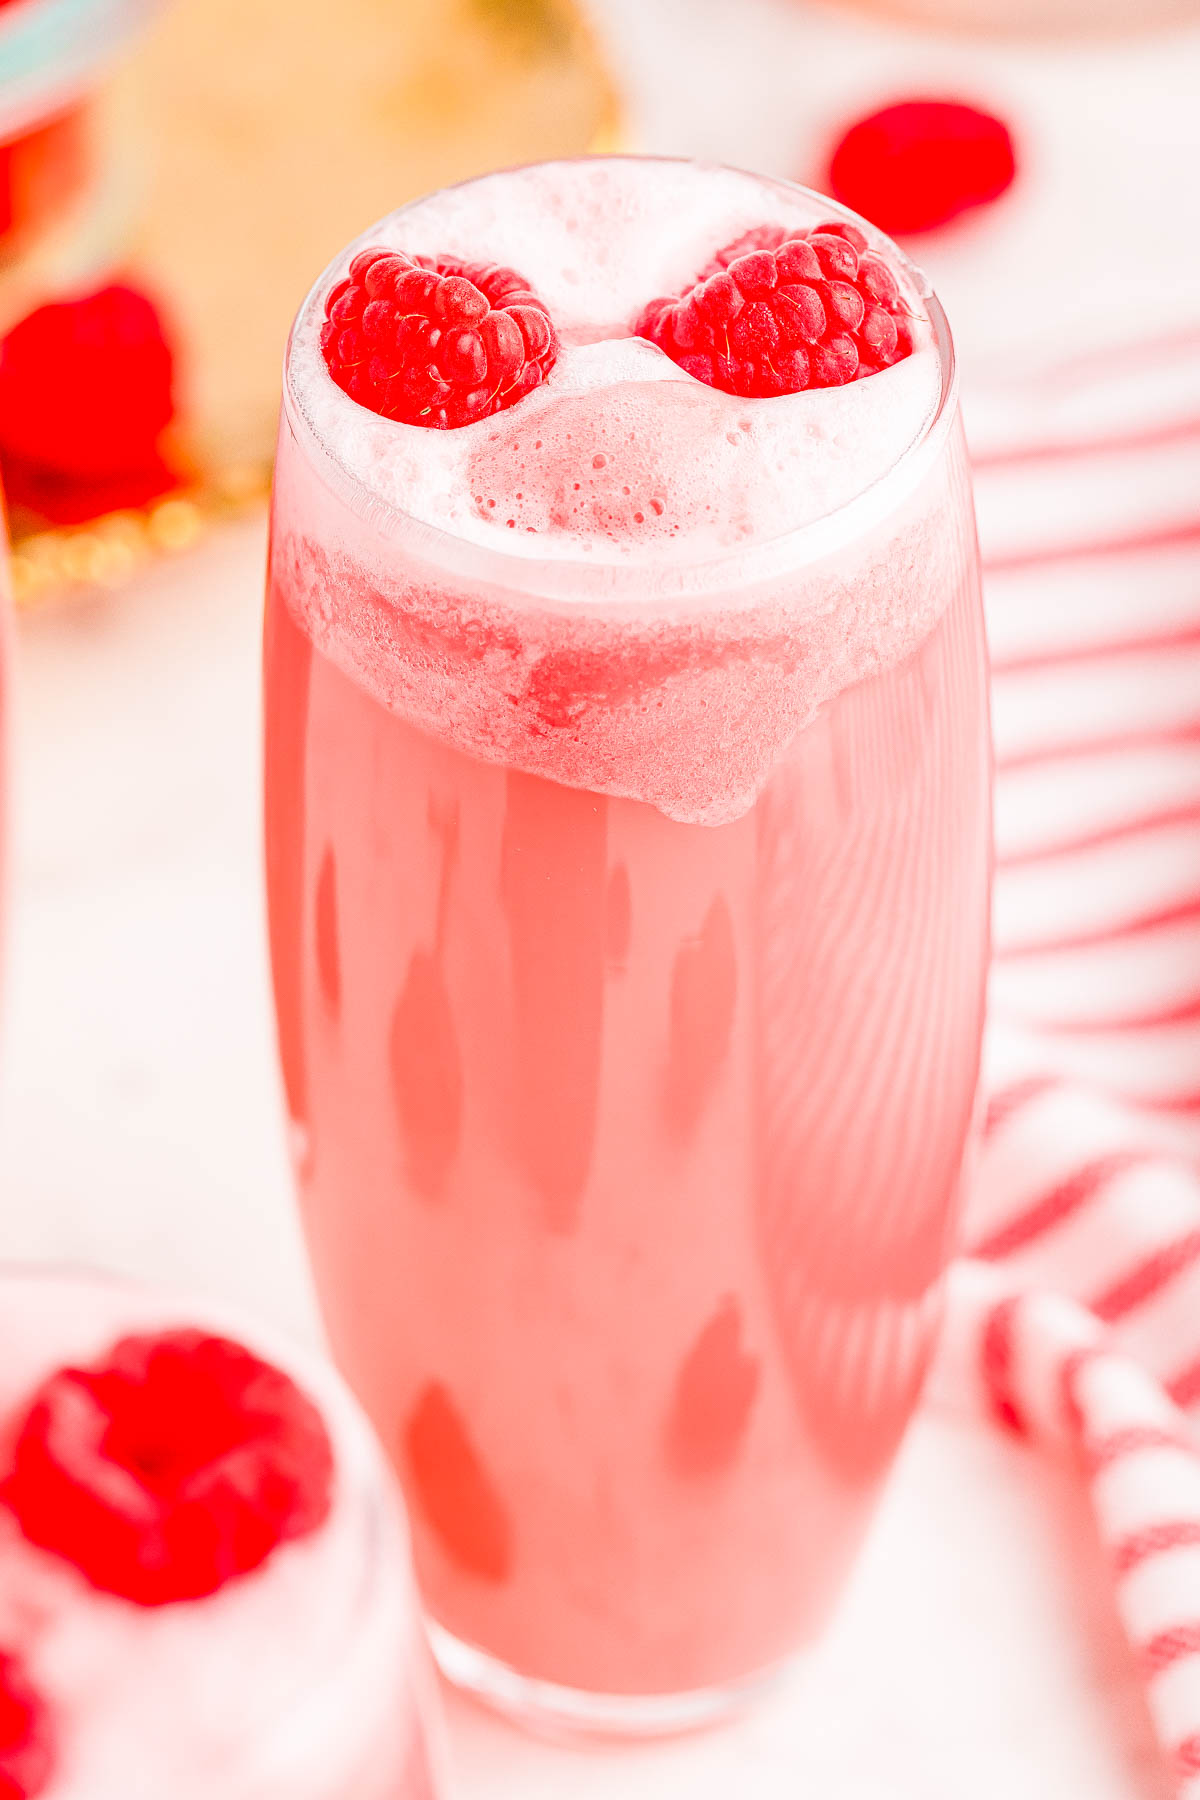 A tall glass filled with a frothy pink drink is topped with two raspberries.